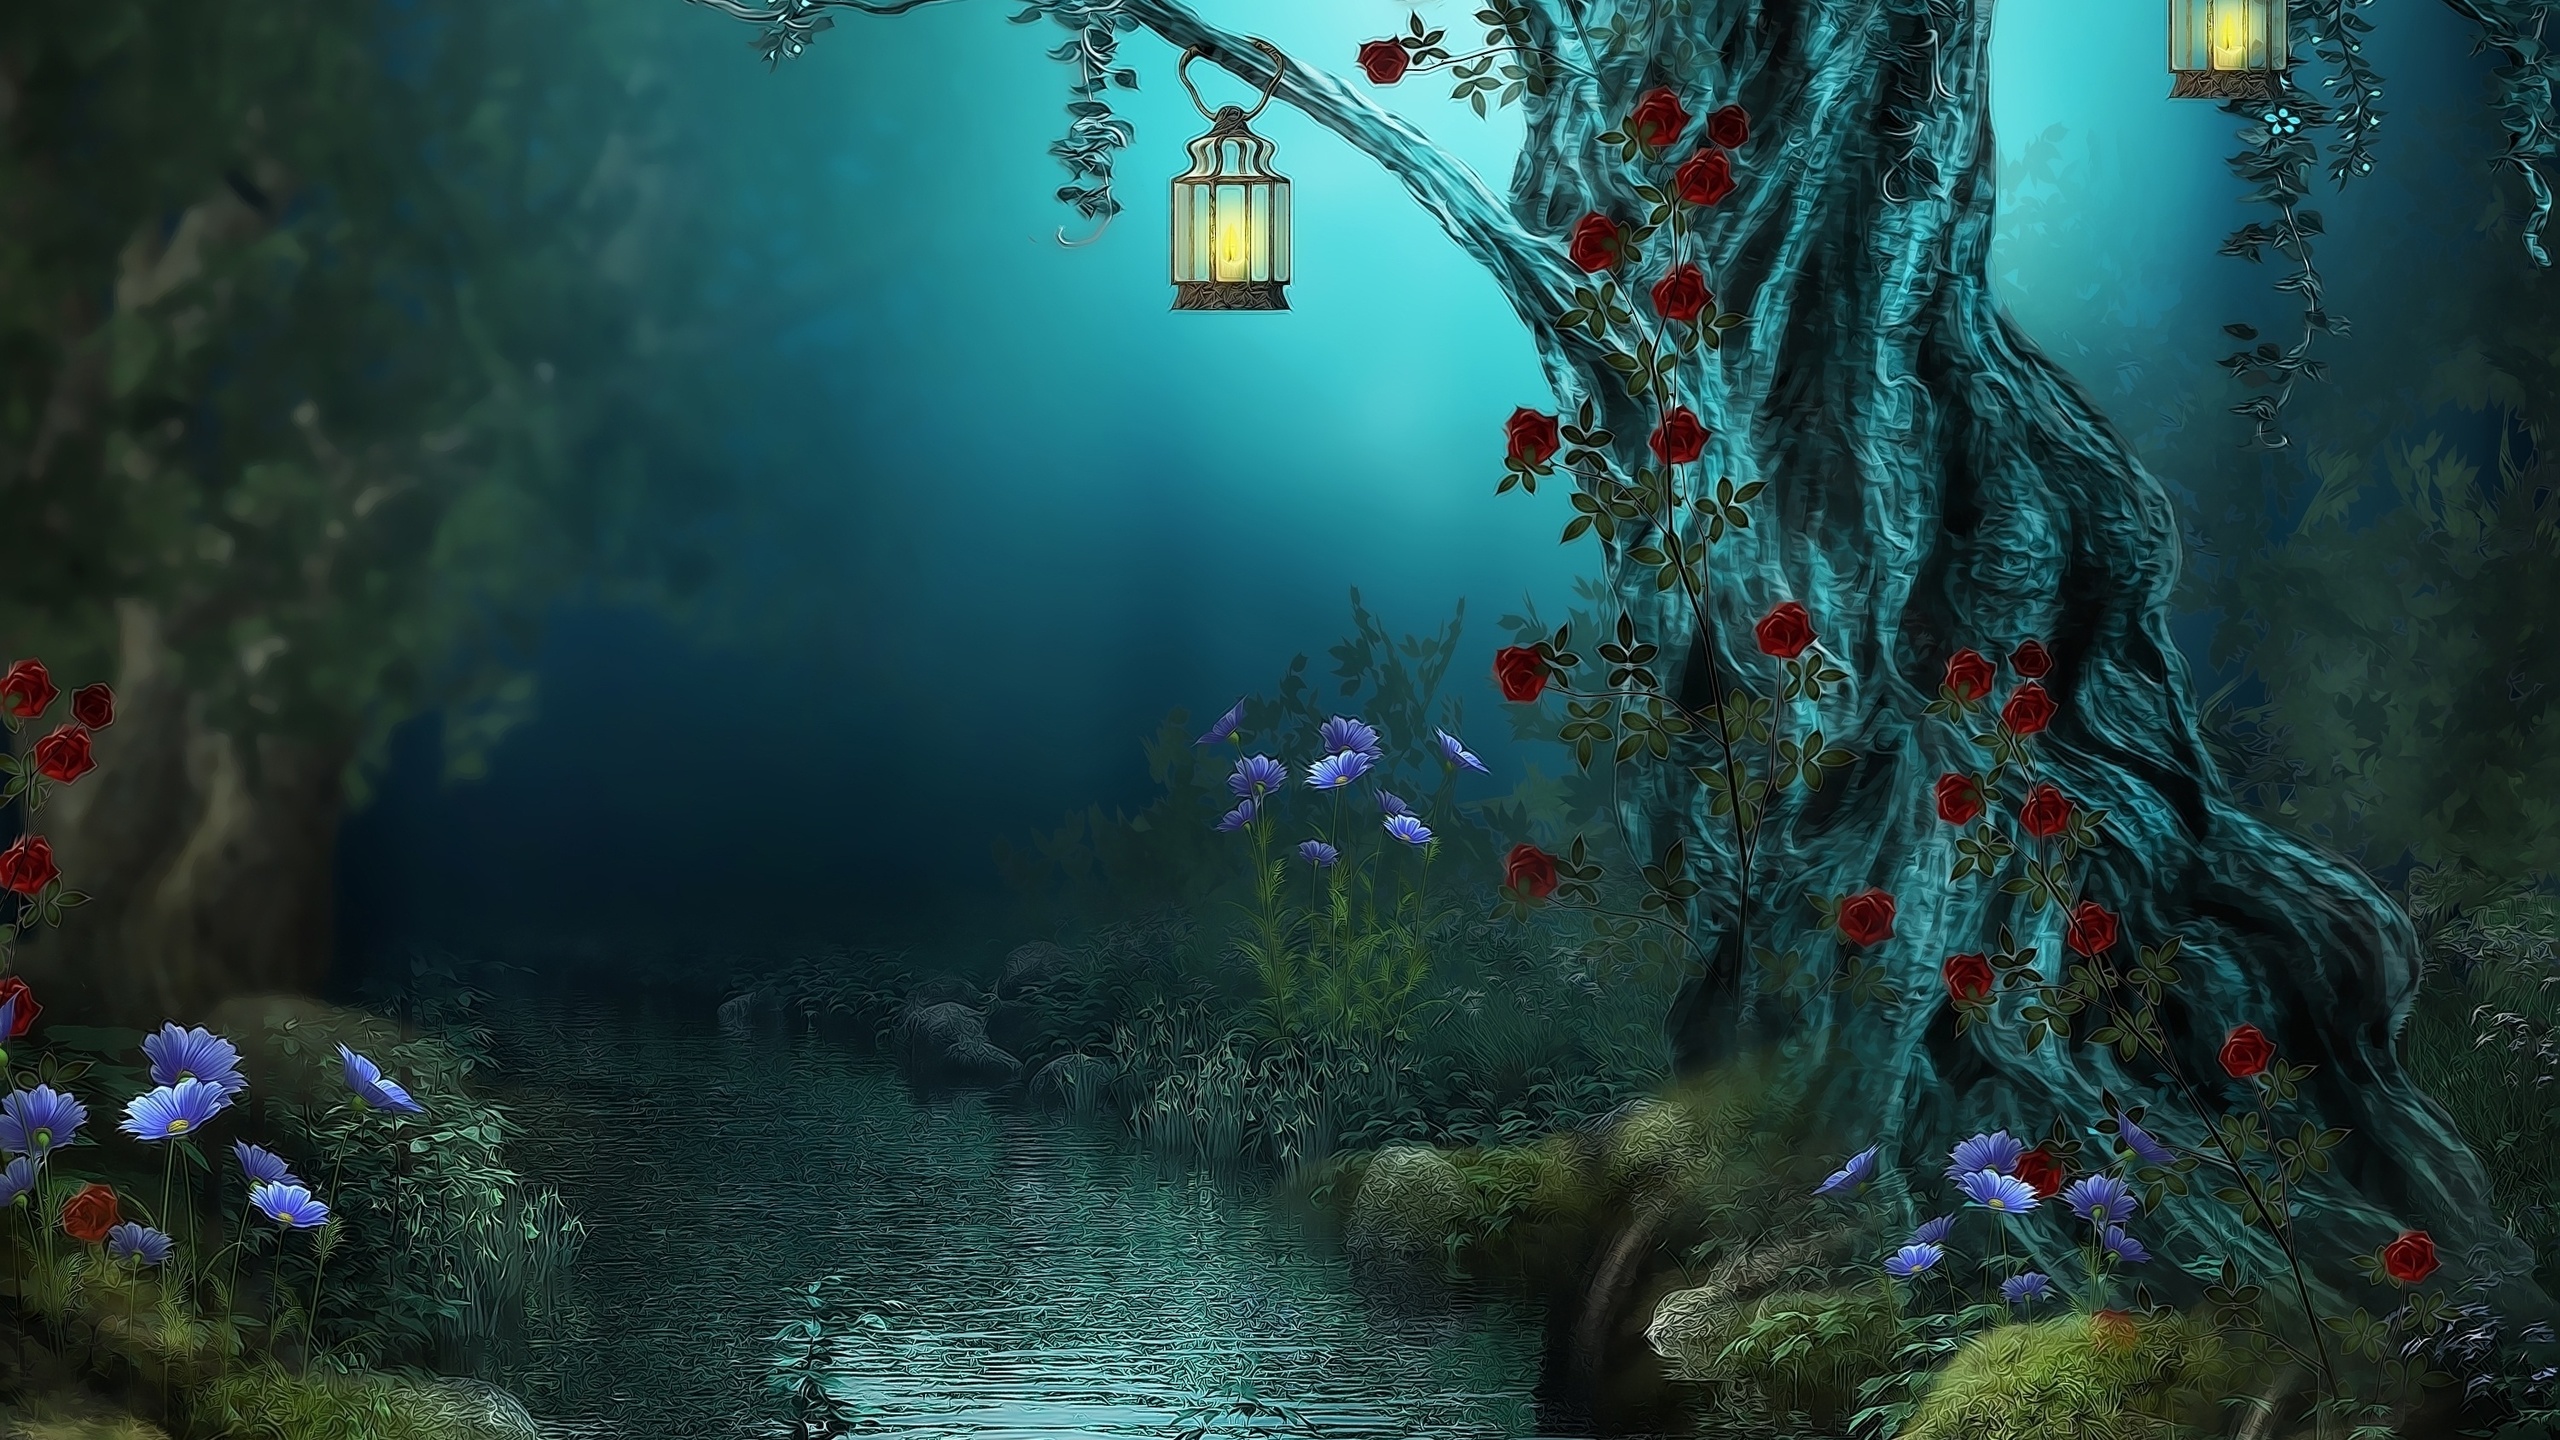  roses, night, , forest, fantasy, red roses, nature, river, lamps, flowers,    , ,,,,,,,,,